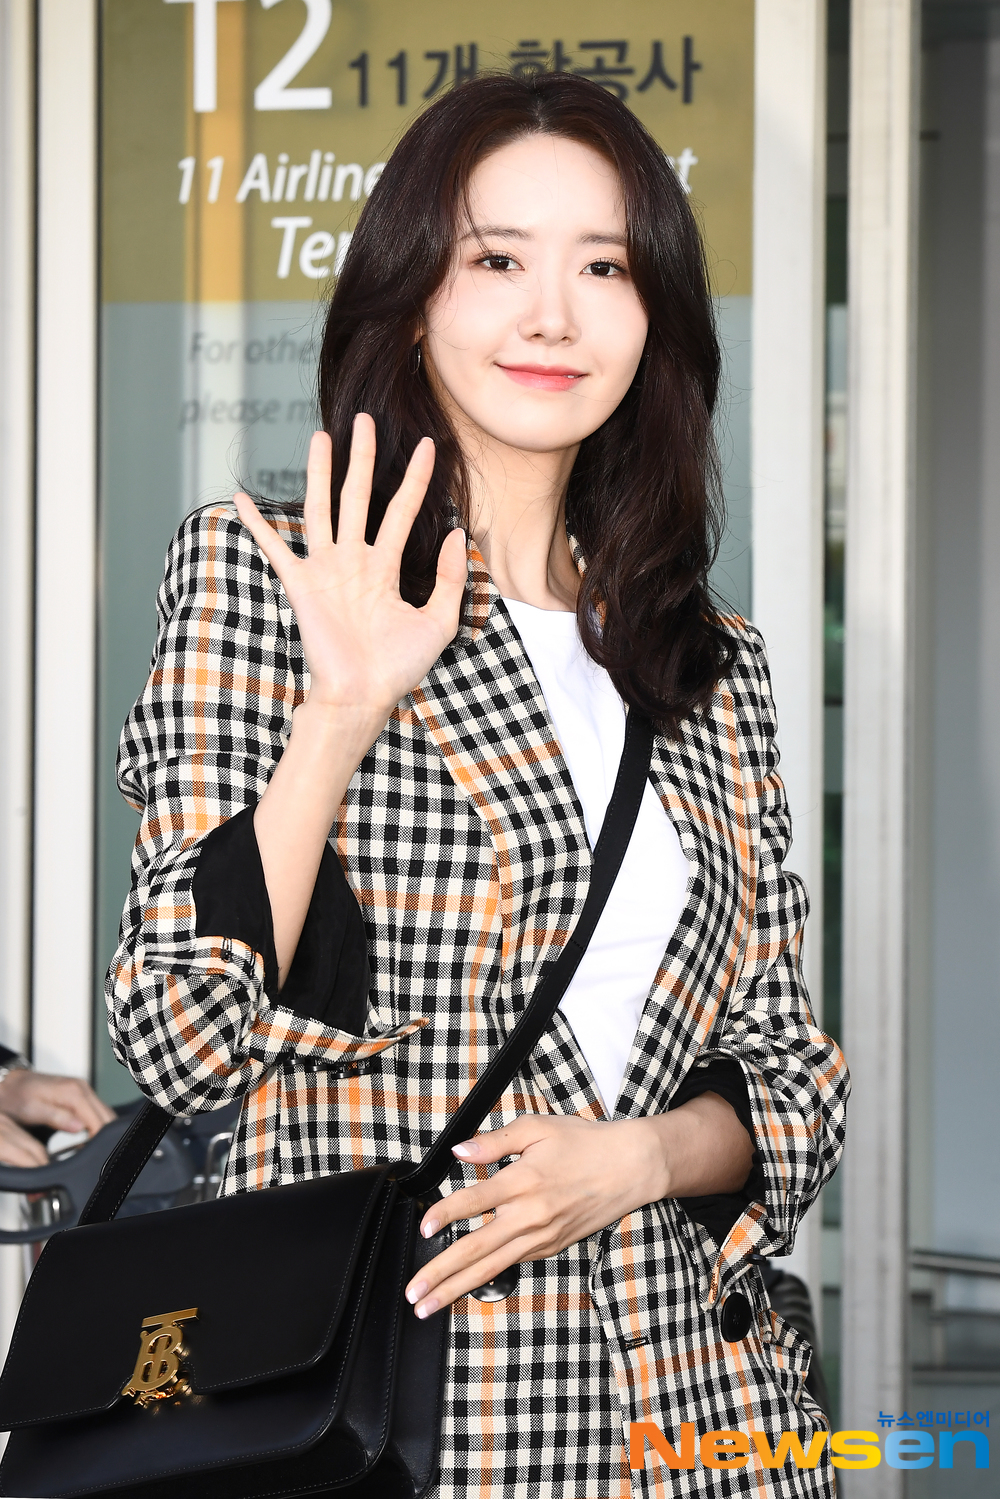 Girls Generation (SNSD) member Im Yoon-ah (YoonA) departed for Singapore on March 29 afternoon to attend a promotional event through the Incheon International Airport in Unseo-dong, Jung-gu, Incheon.Girls Generation (SNSD) member Im Yoon-ah is leaving for Singapore with an airport fashion.exponential earthquake